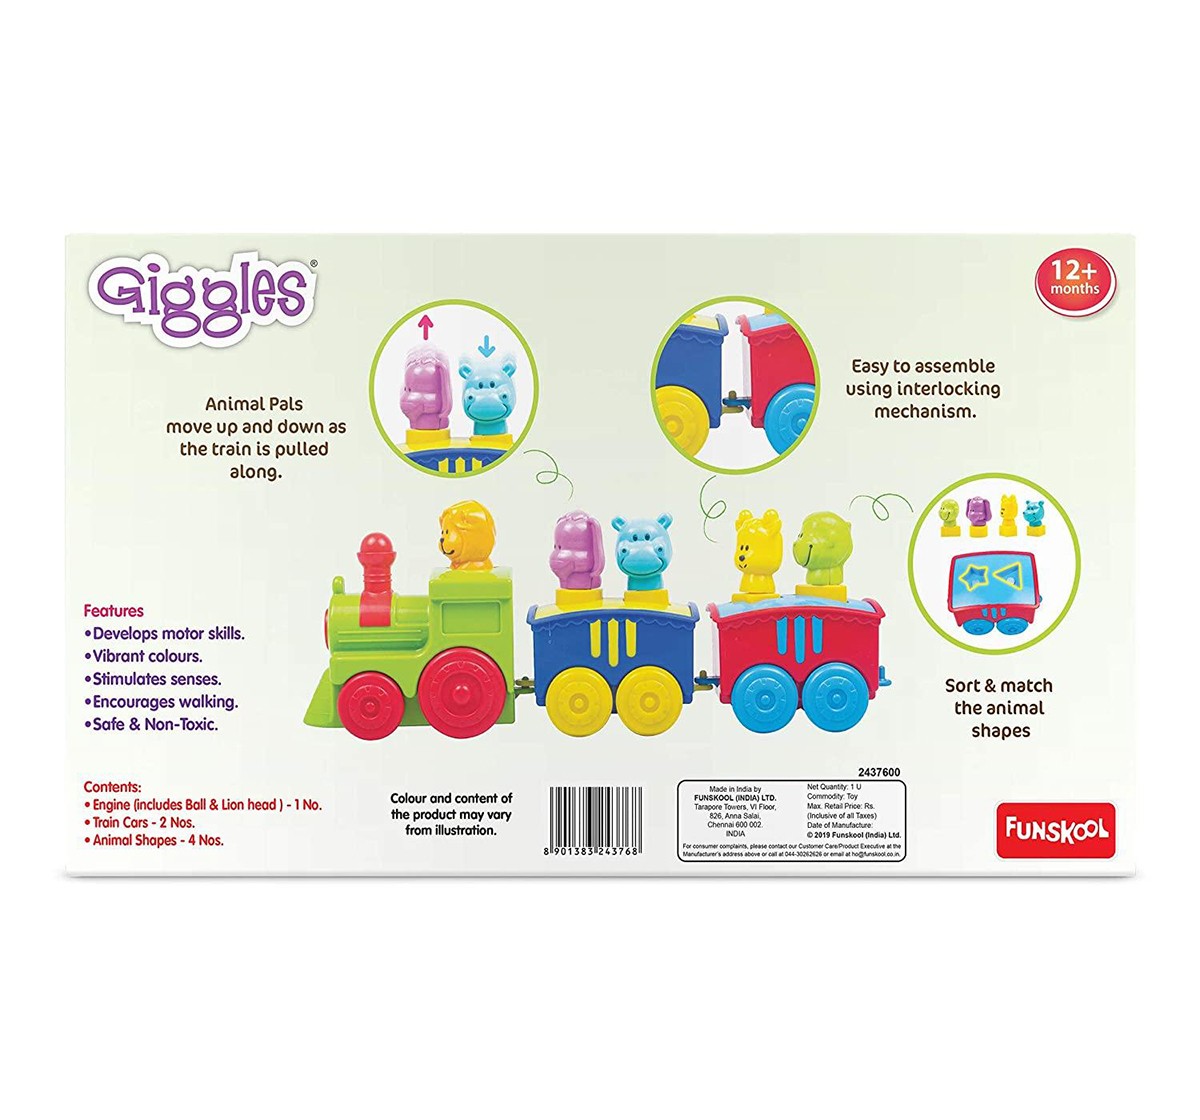  Giggles Toy Train  Early Learner Toys for Kids age 3Y+ 